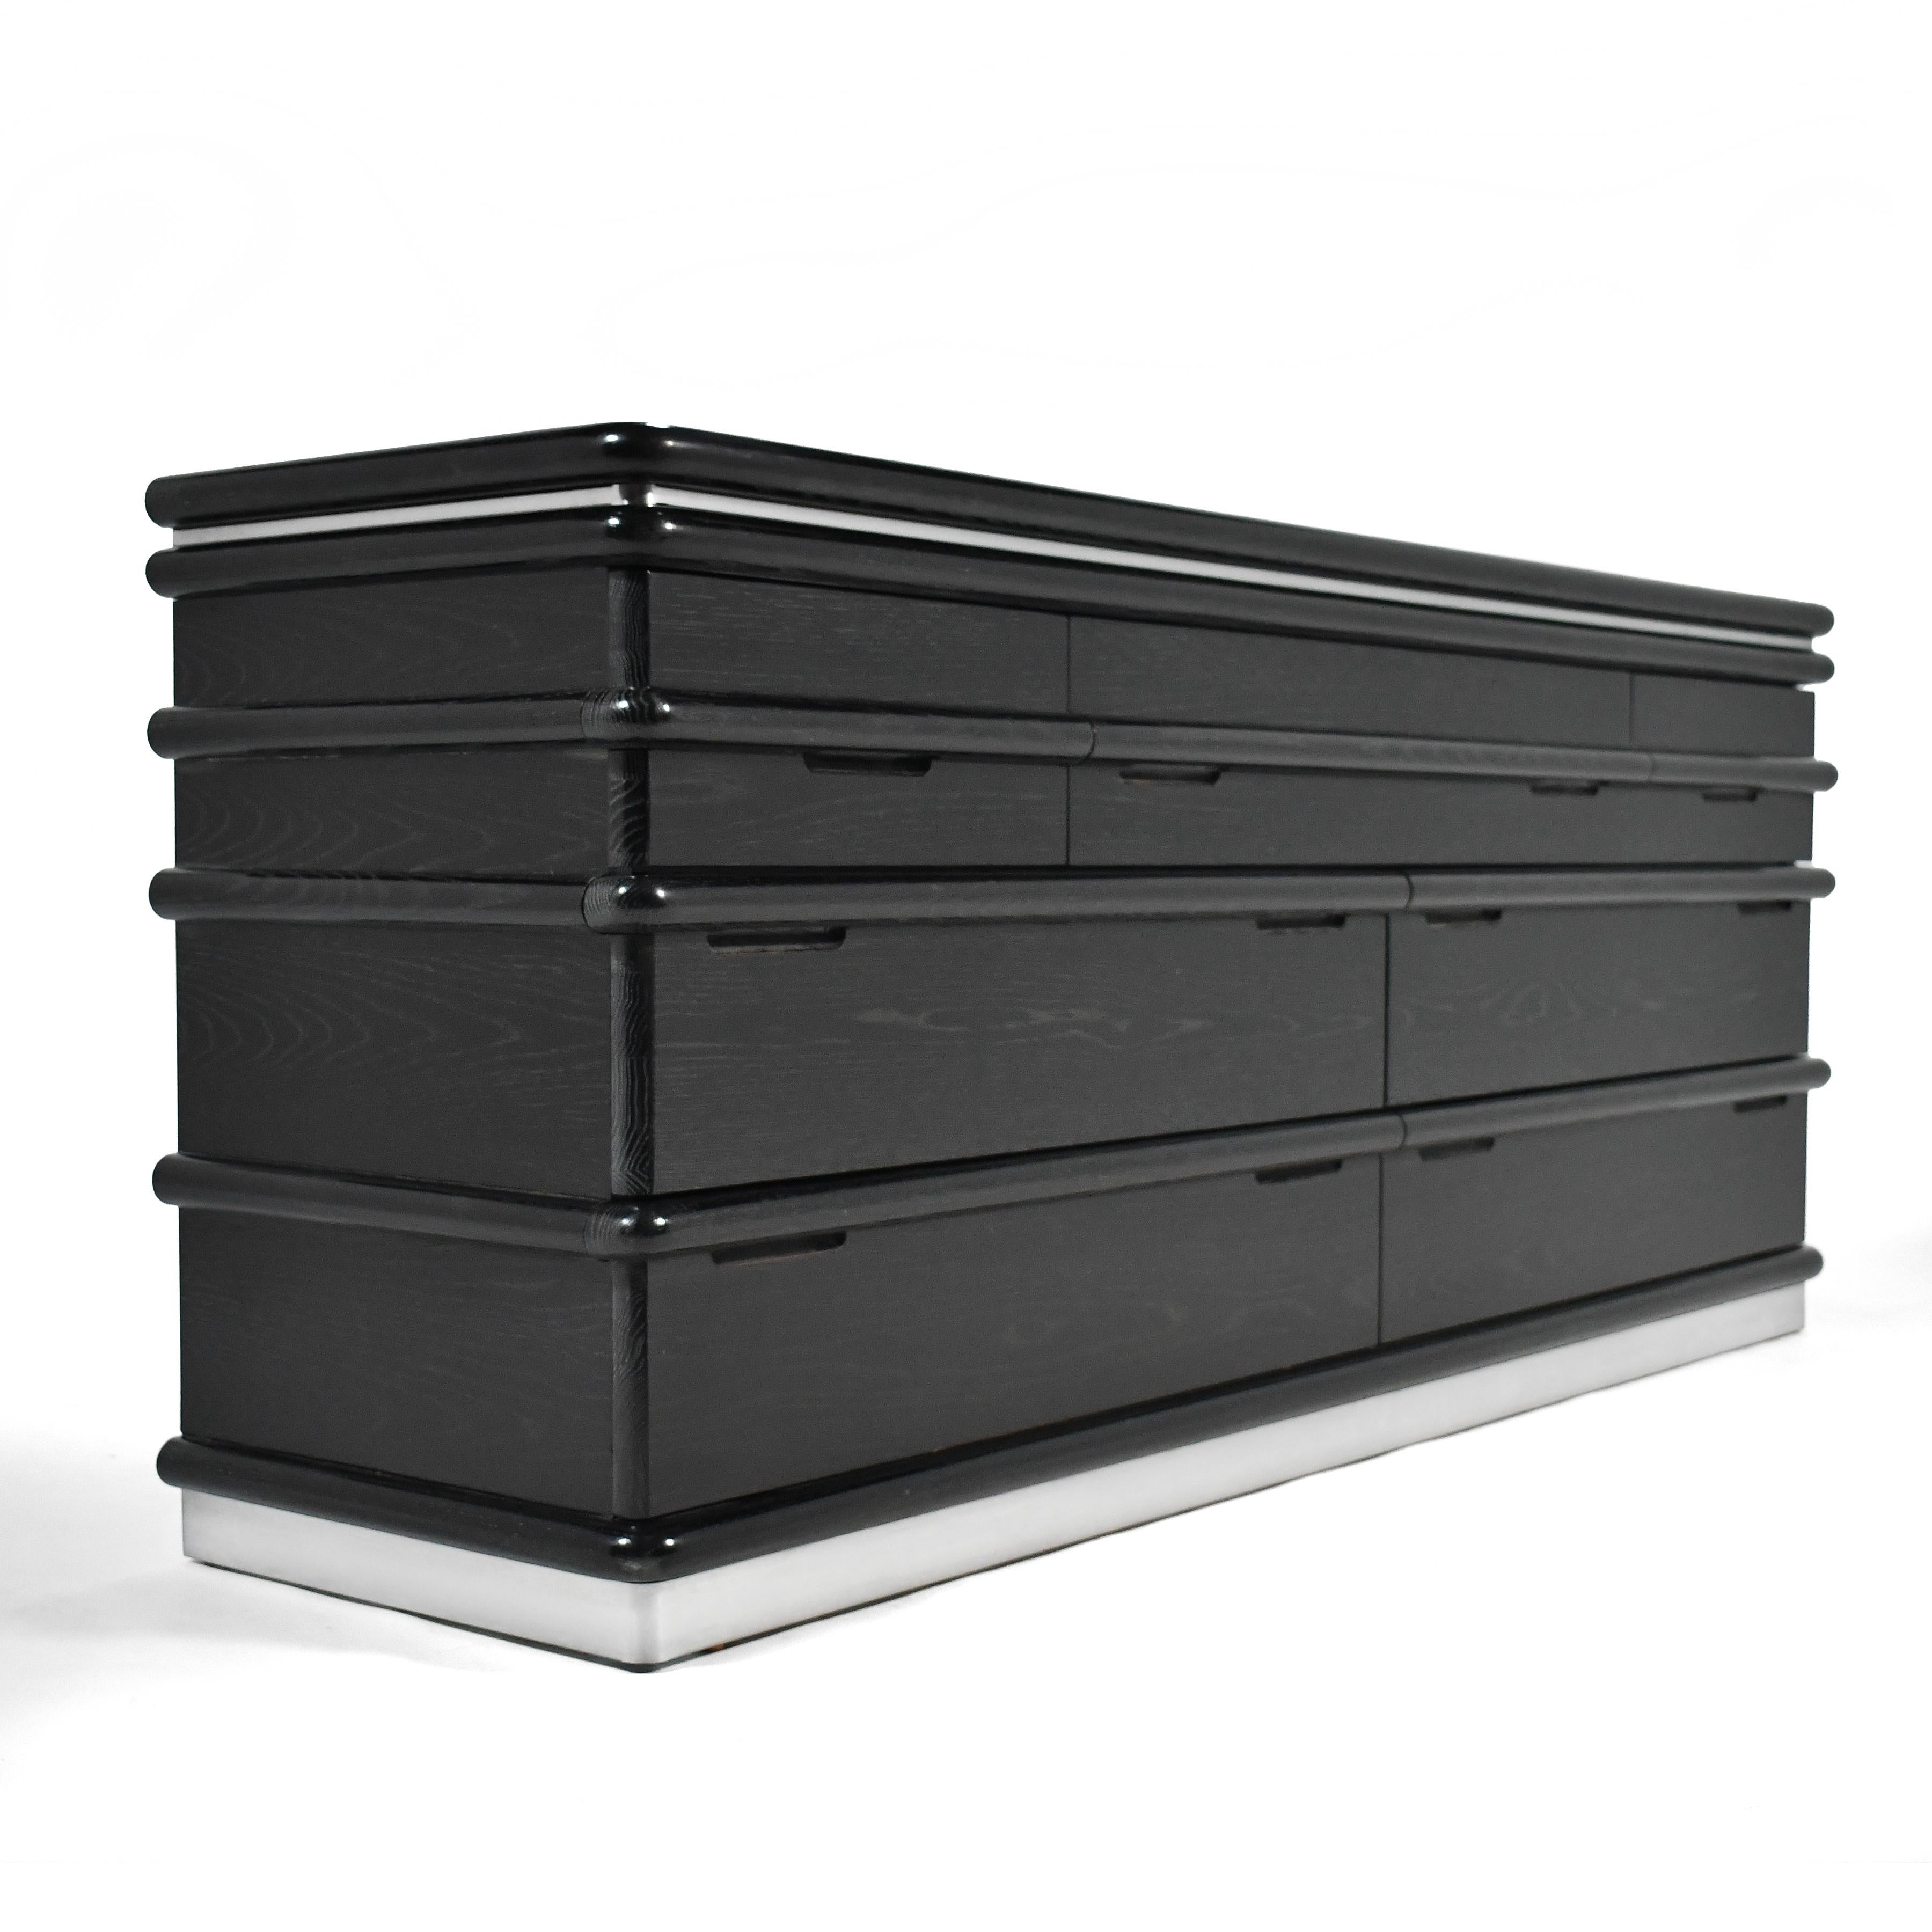 Designed by Jay Spectre for Century, this dramatic 7-drawer dresser from his 